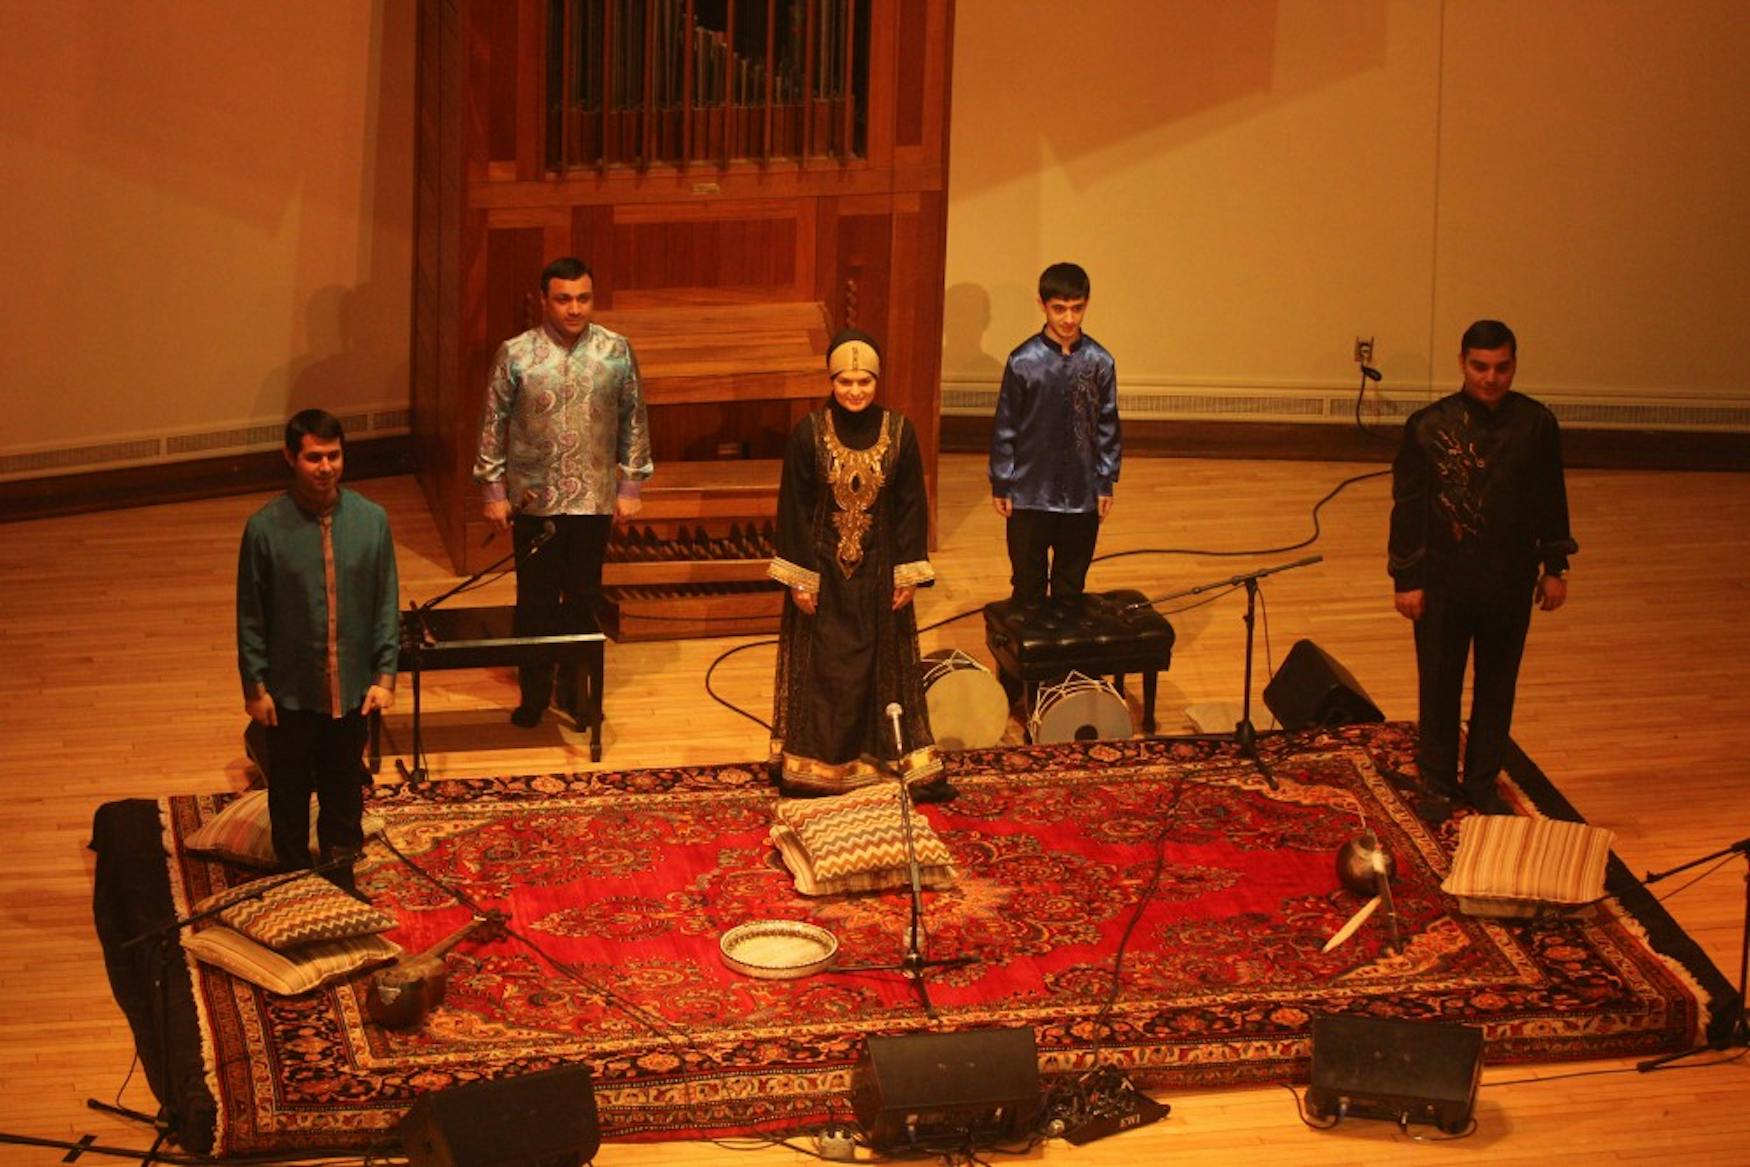 WEEK IN RESIDENCE: Vocalist Faraga Qasimova spent a week at Brandeis, speaking at classes and performing her music.